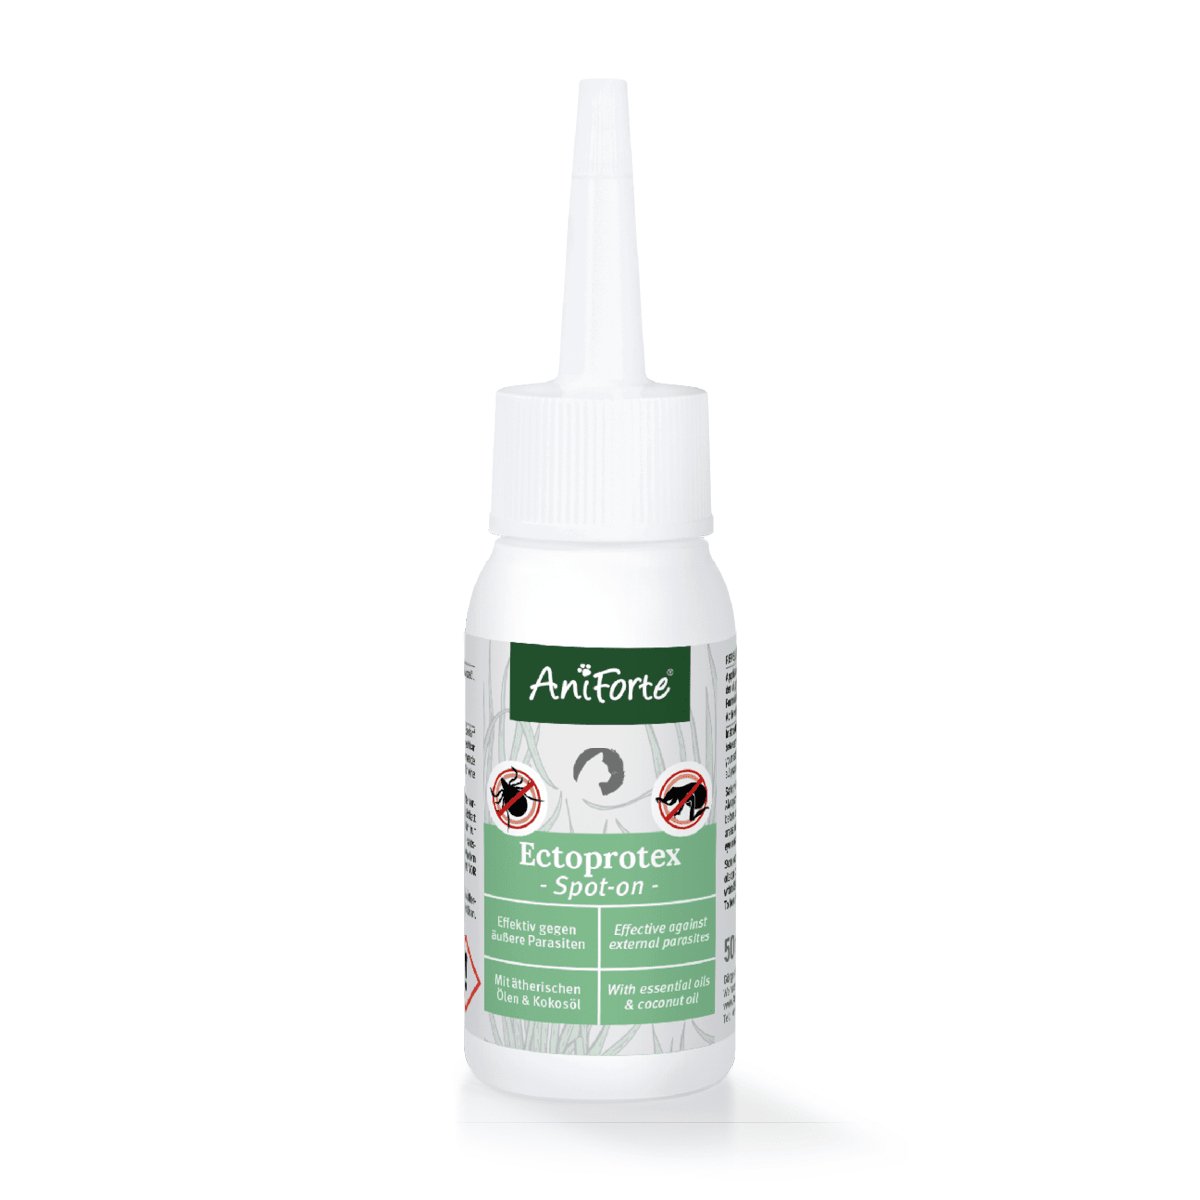 Ectoprotex Cat - 50 ml - Spot-On Tick and Flea Protection - AniForte UK